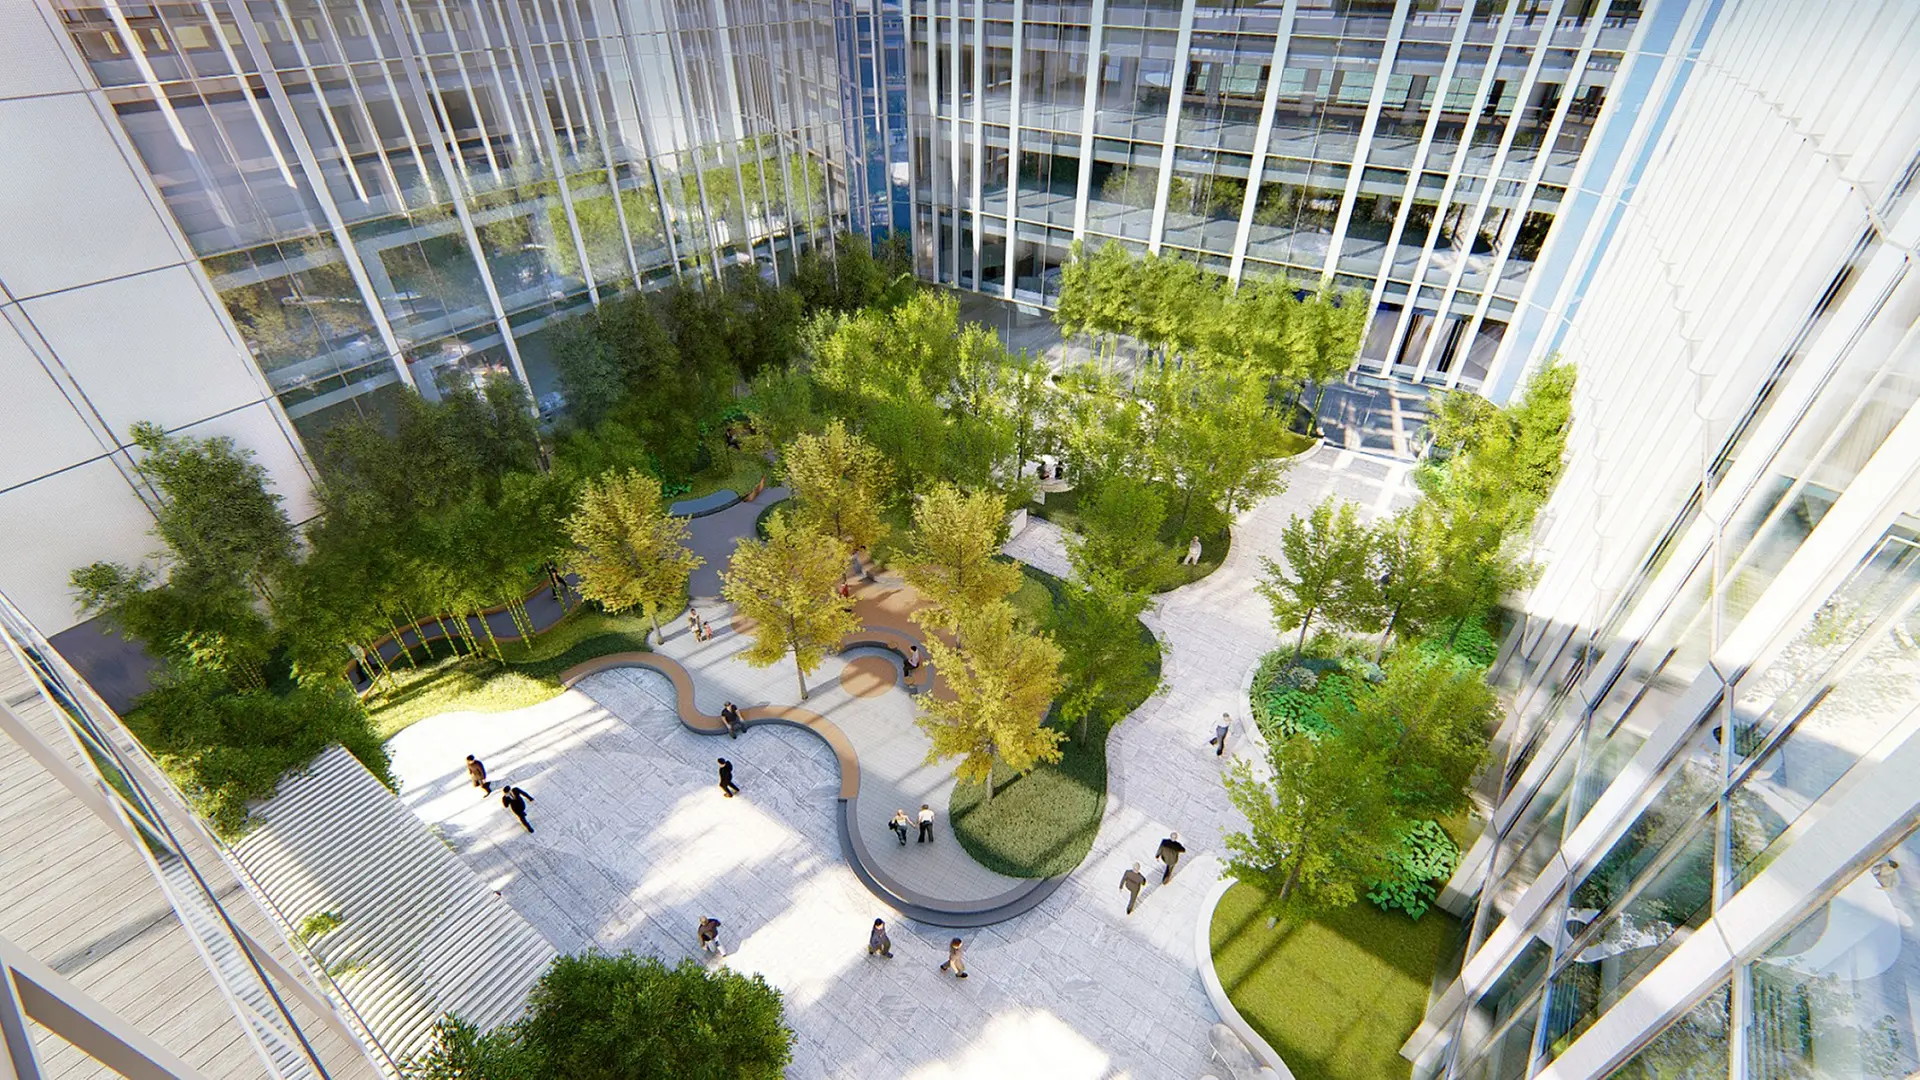 Innovation Center Shanghai: Various functional spaces are set within lush greenery for staff and visitors to connect with nature.